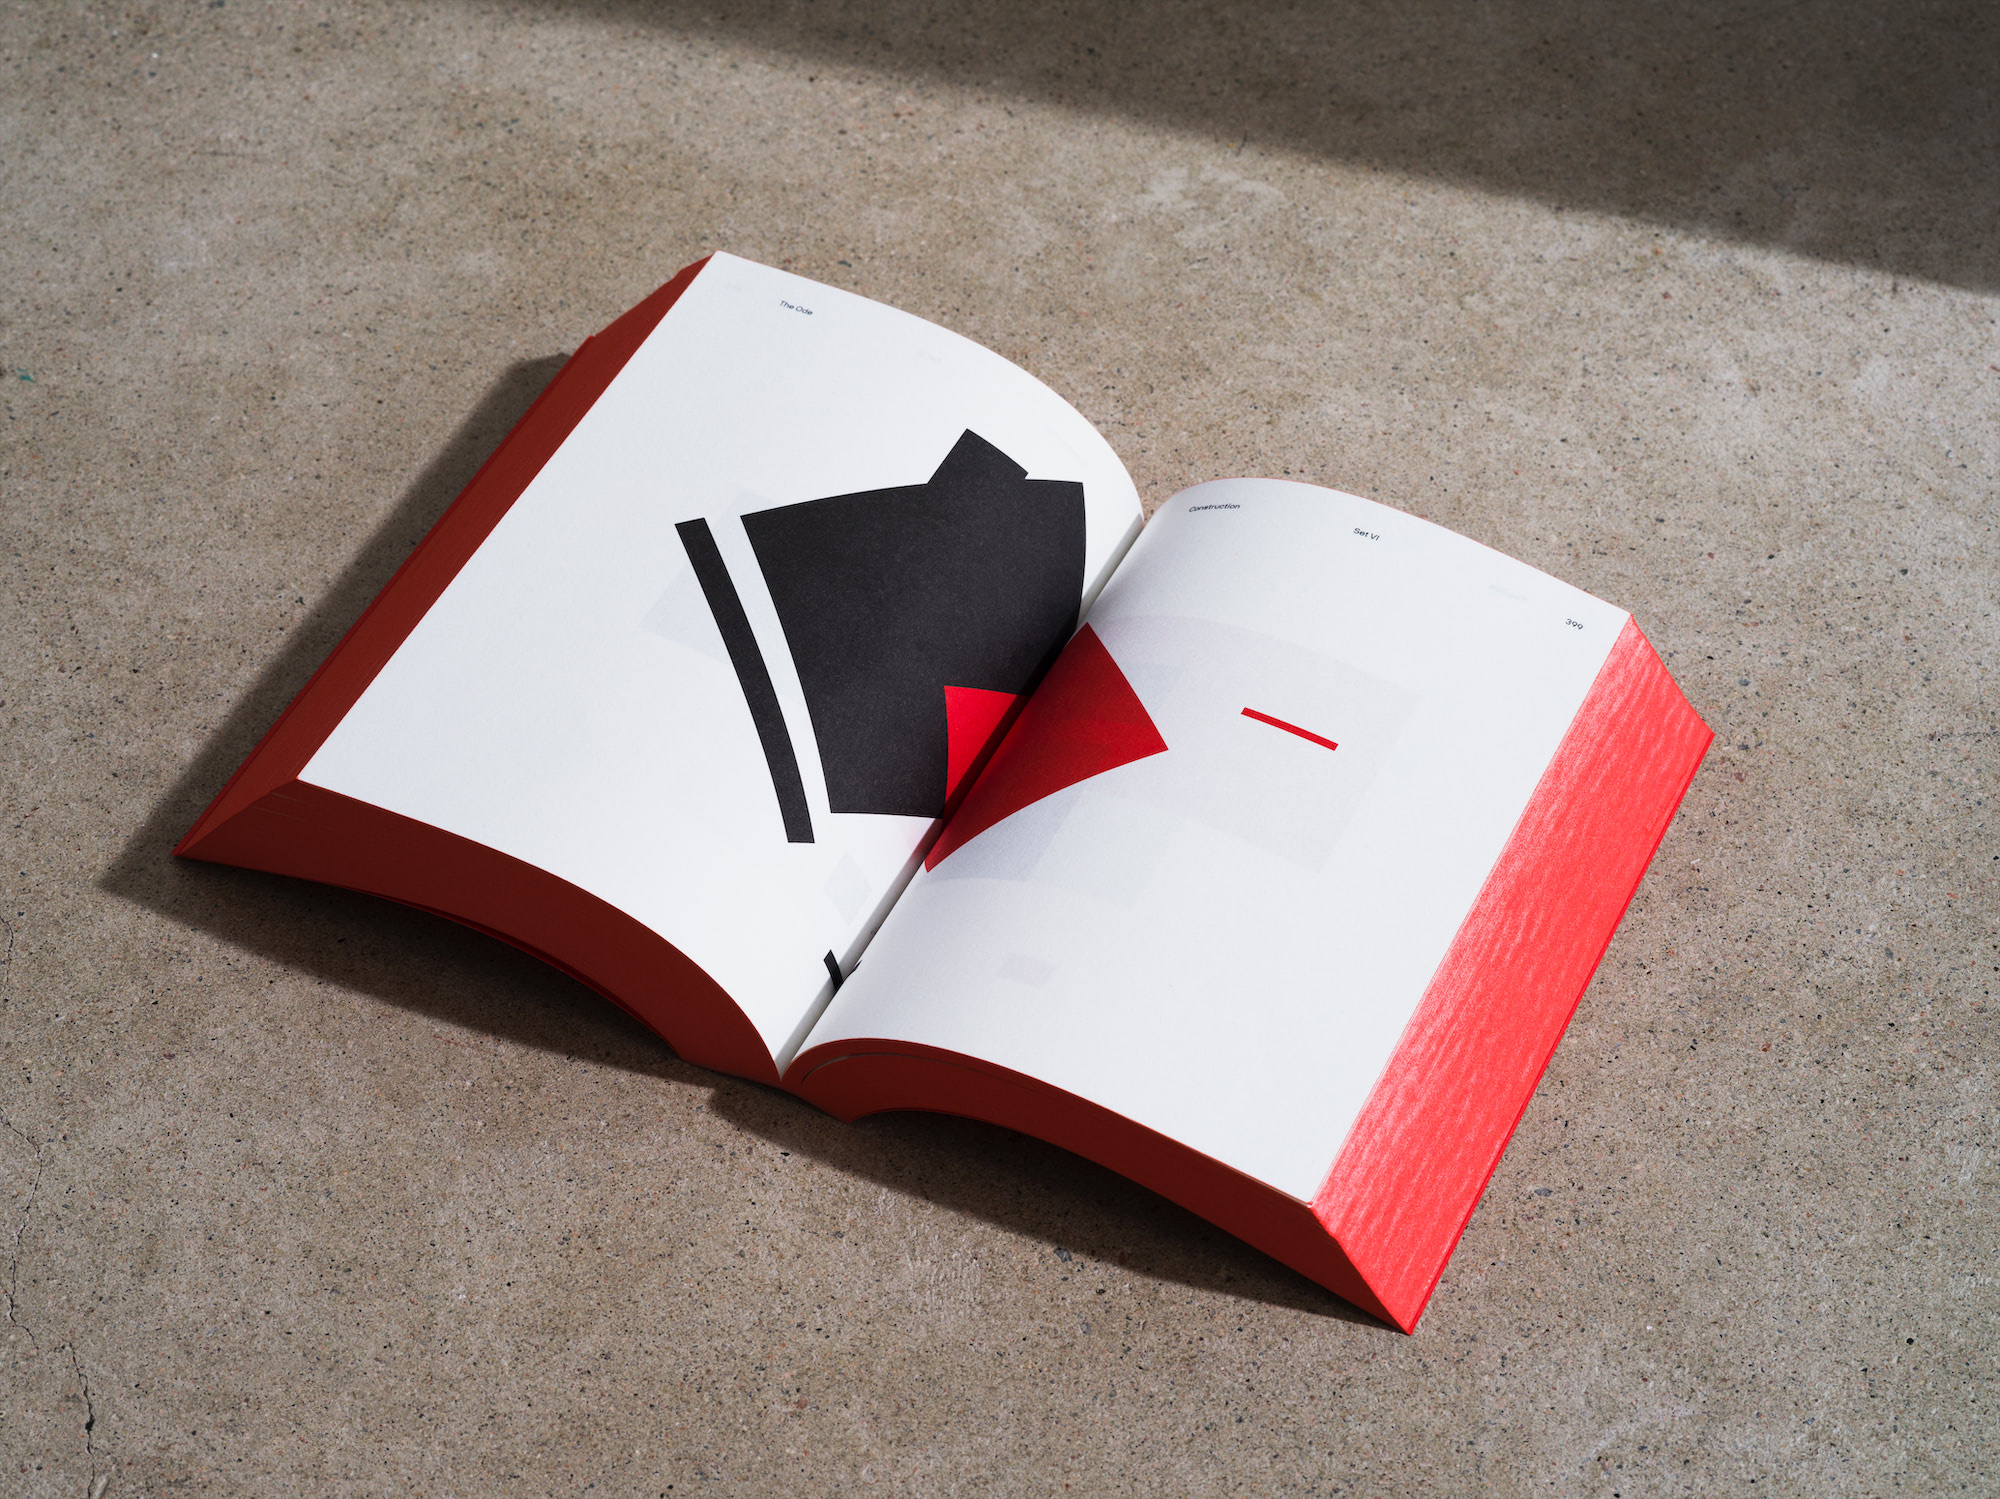 The printed book Ode to Construction – Abstraction in the Digital Age